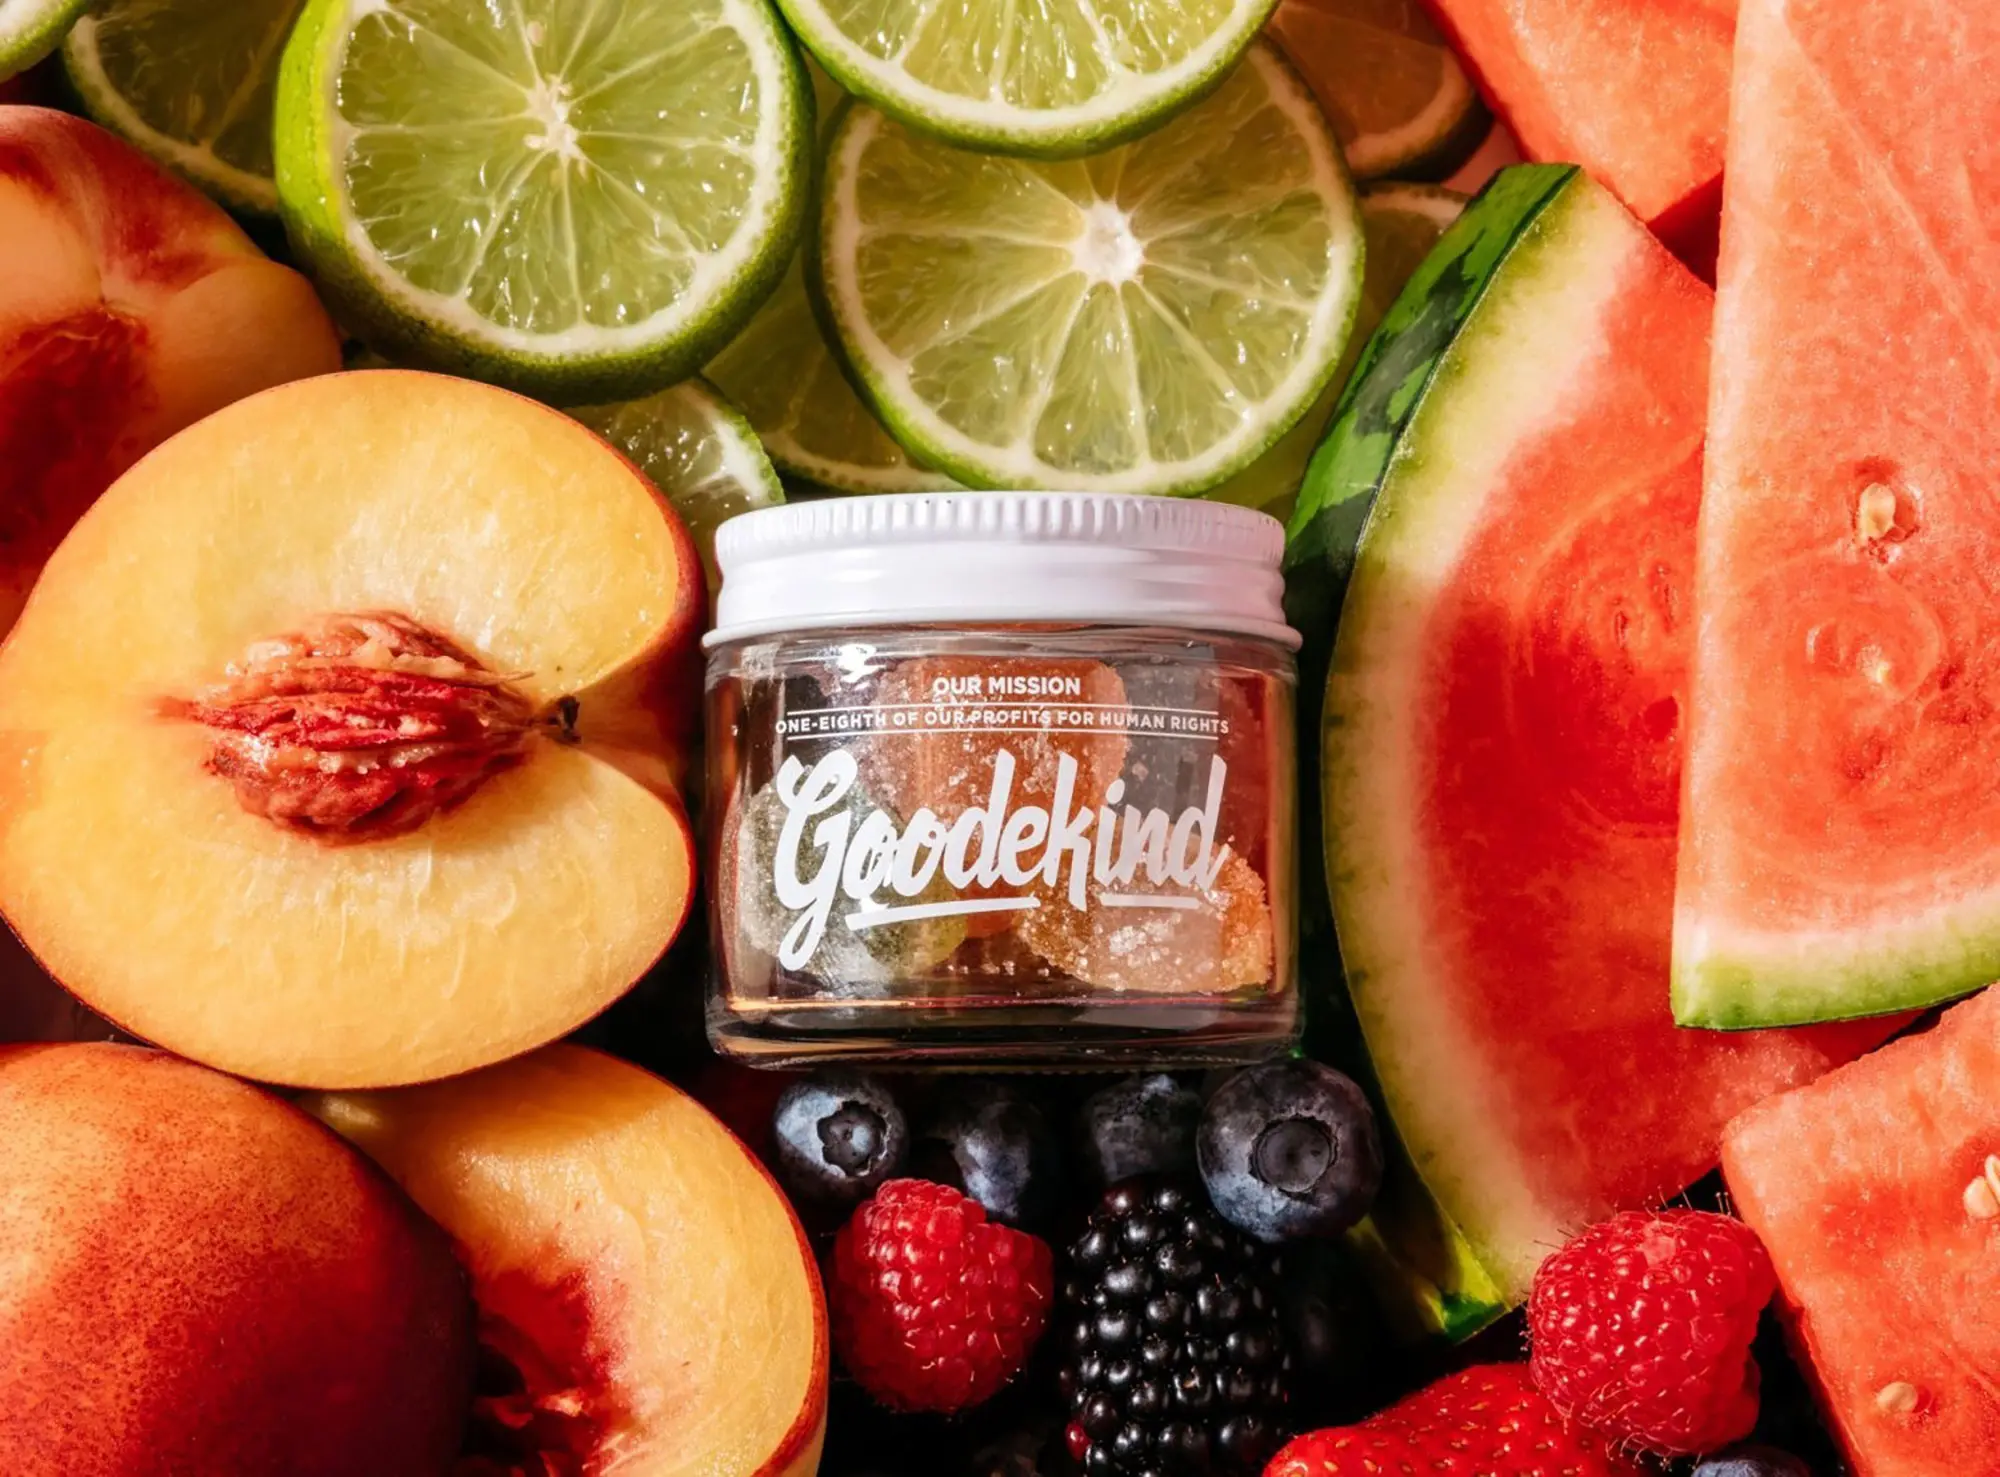 Goodekind’s Delta 8 THC Gummies debuted in two types of sustainable packaging—a lightweight bag and the recyclable-and-reusable jar pictured here. 